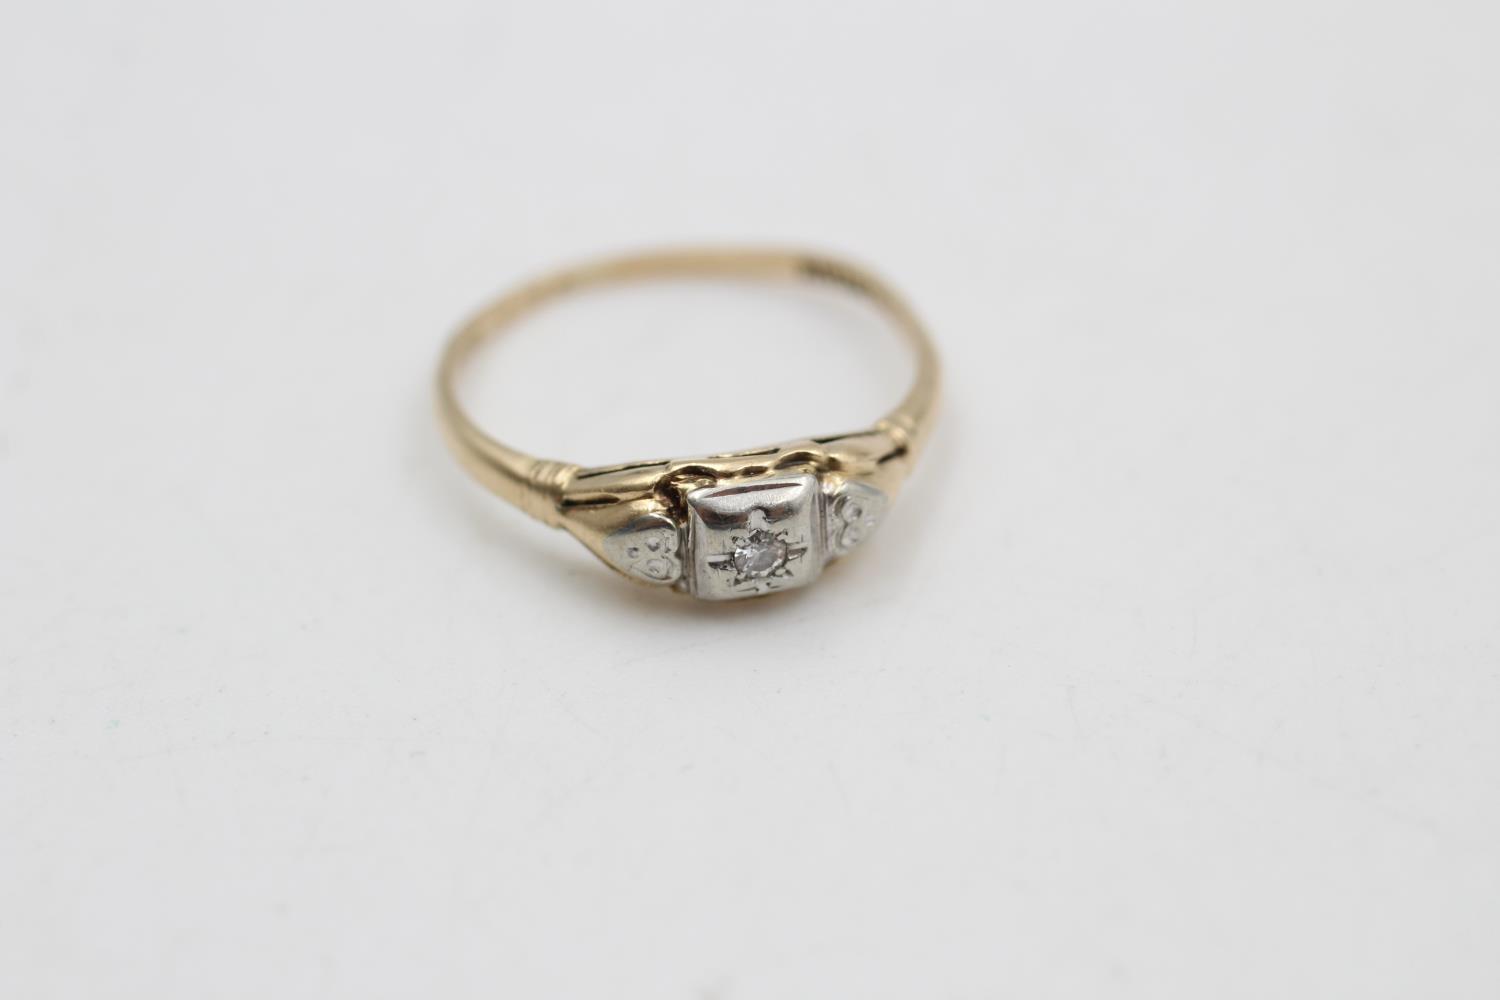 14ct Gold Vintage Diamond Bridal Wreath Diamond Solitaire Ring (1.6g) Size O - Image 2 of 4